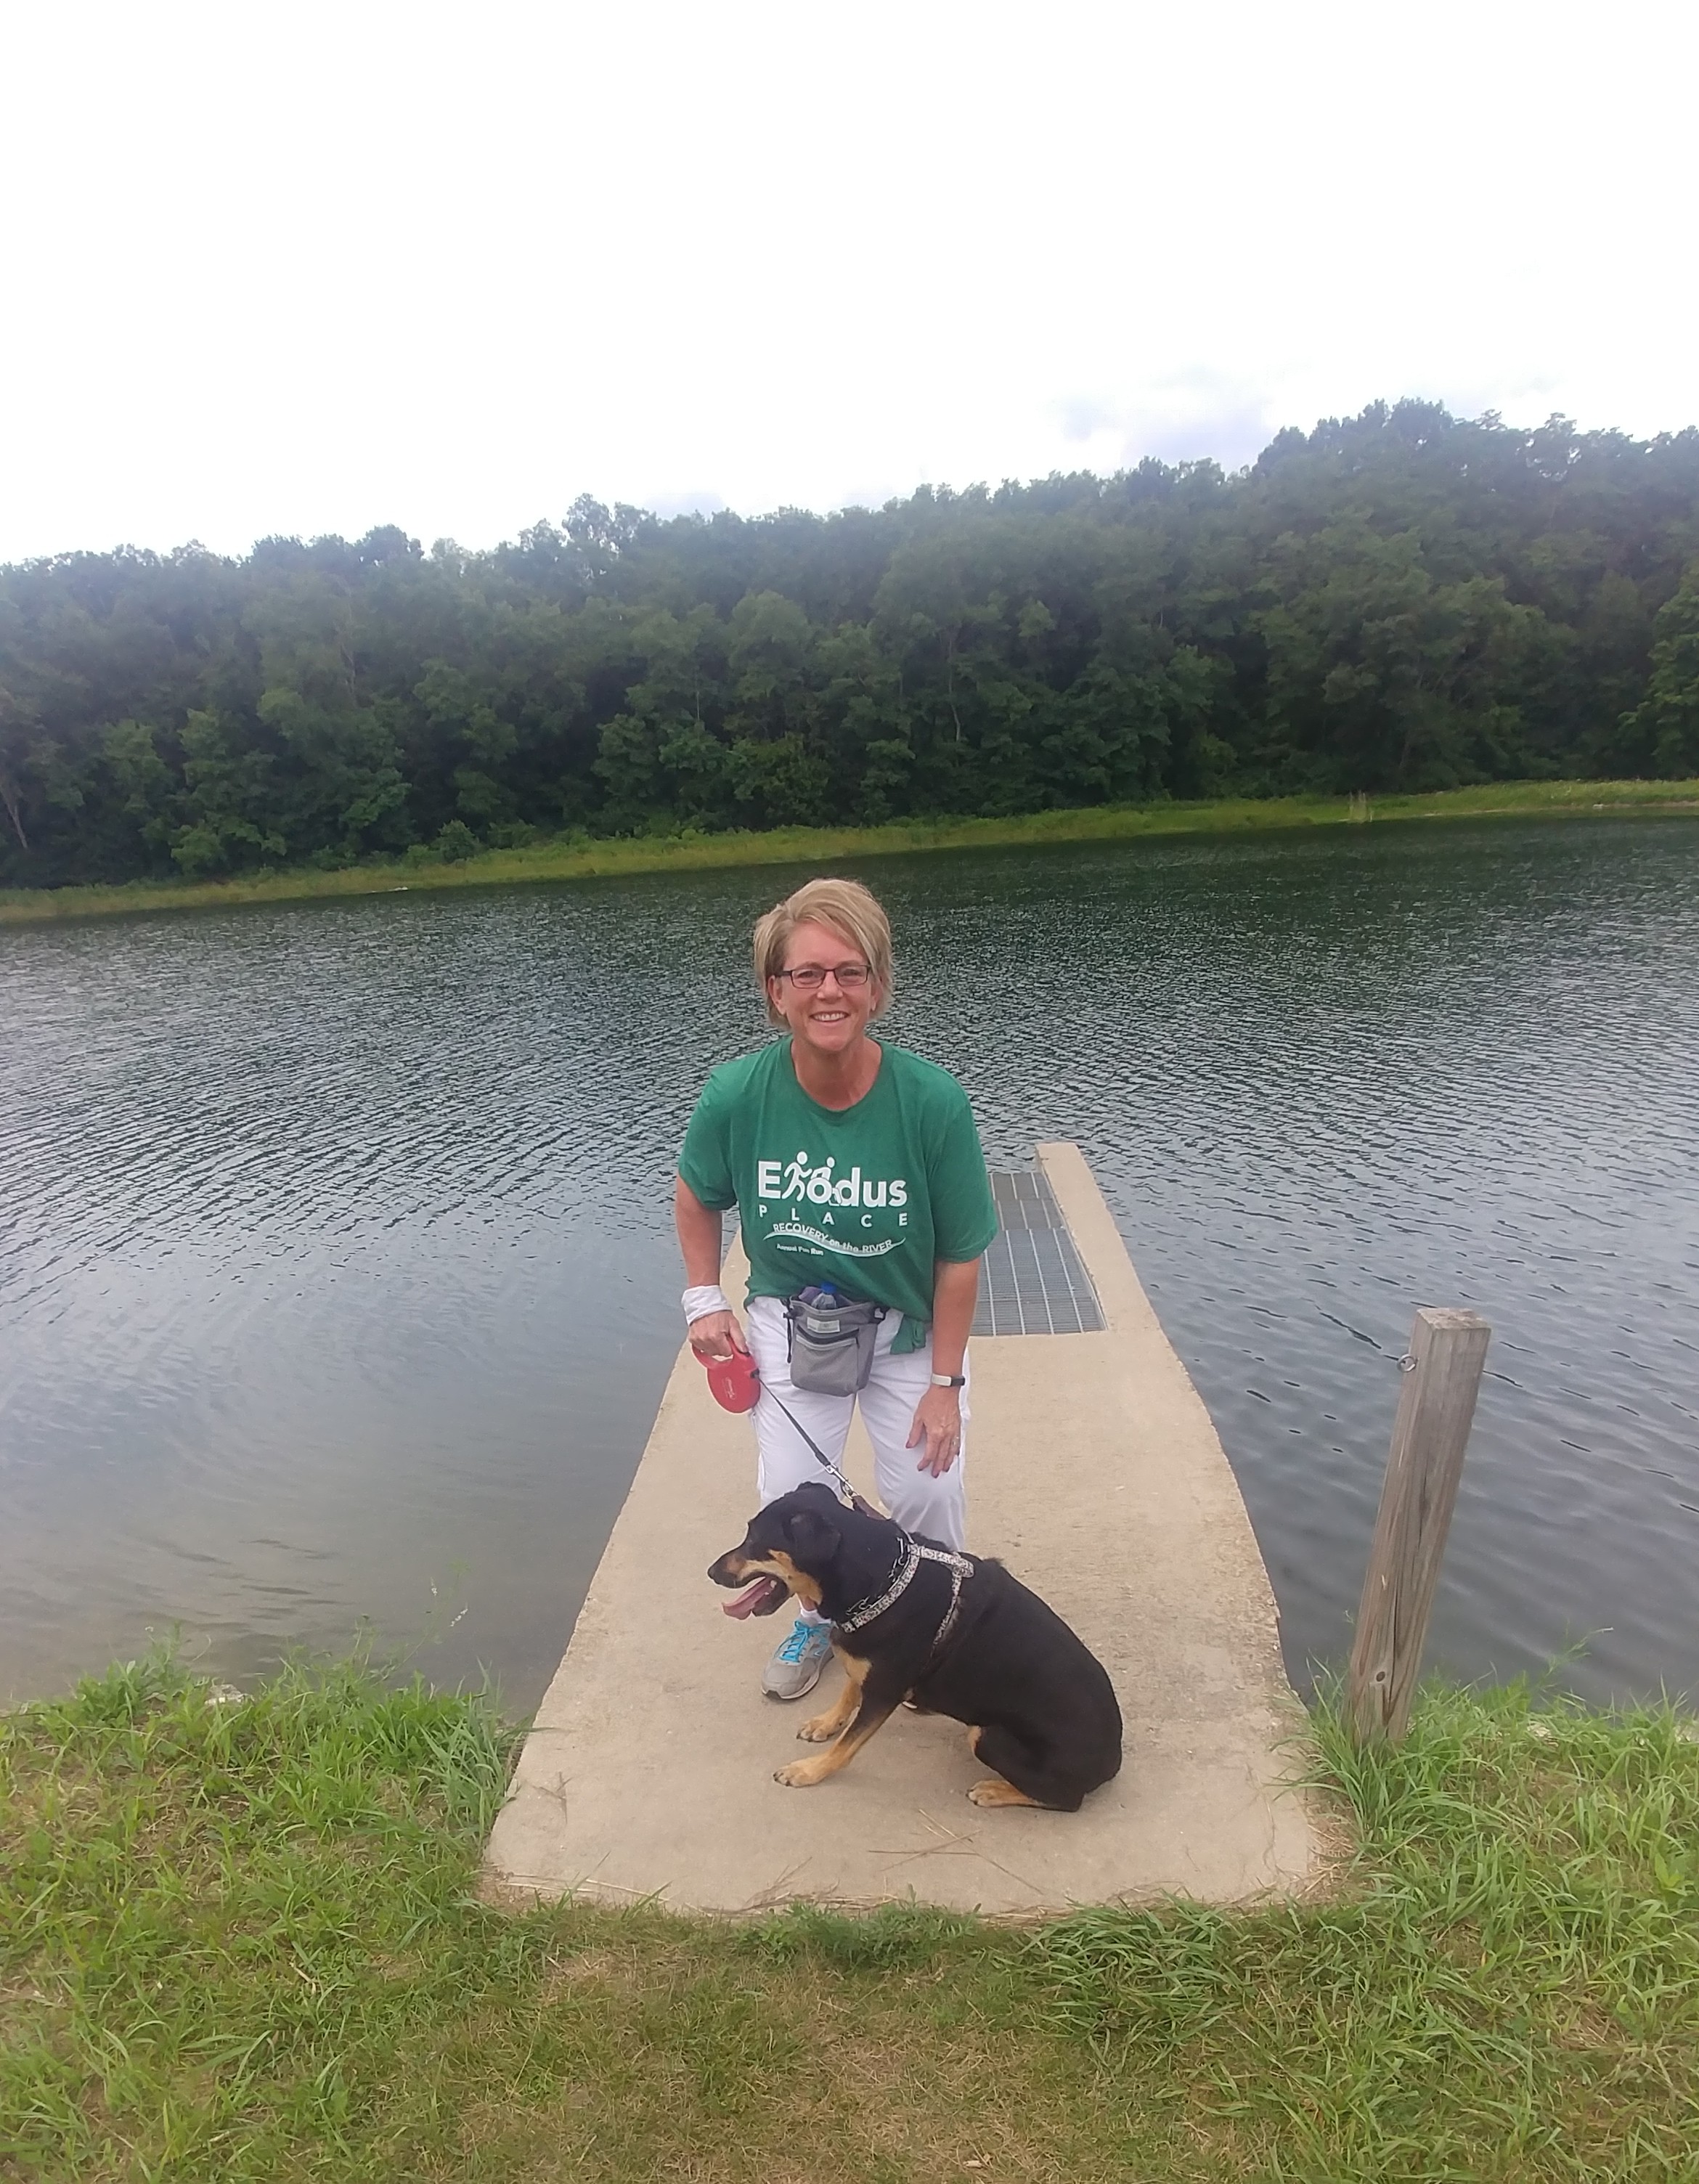 Bev Crandall-Rice participating in a virtual walk-a-thon with her dog, posing in front of a river